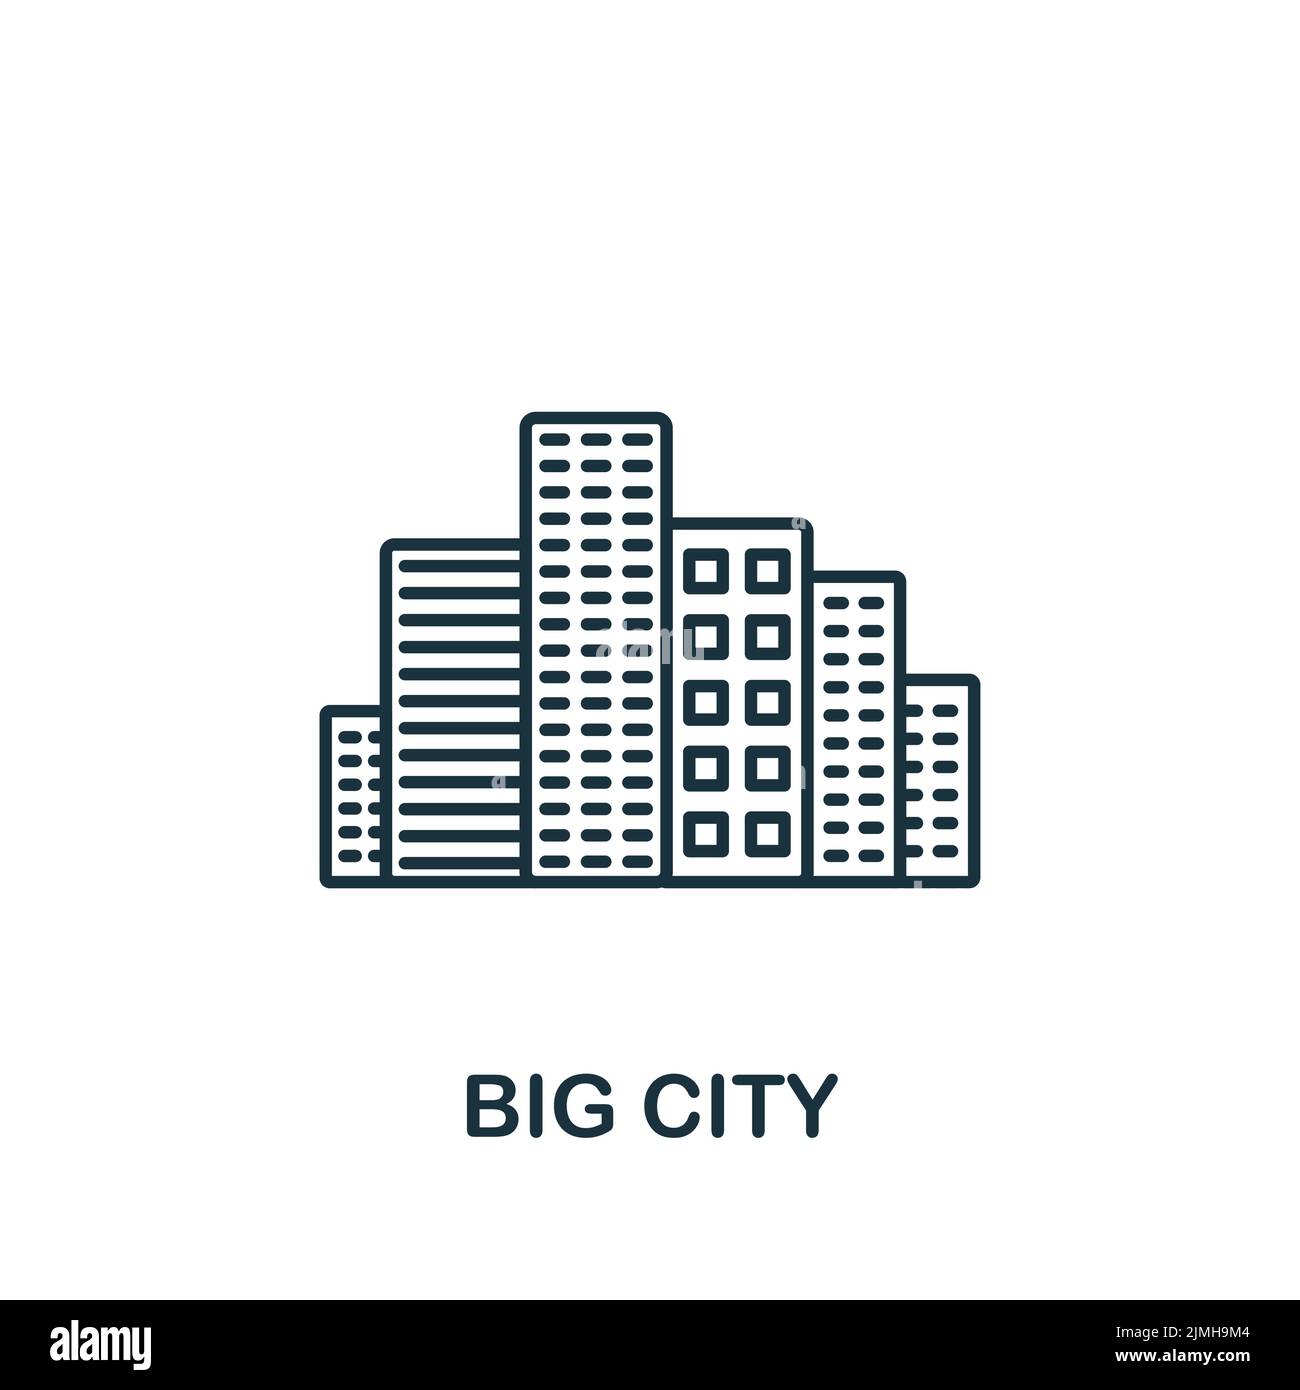 Big City icon. Monochrome simple icon for templates, web design and infographics Stock Vector